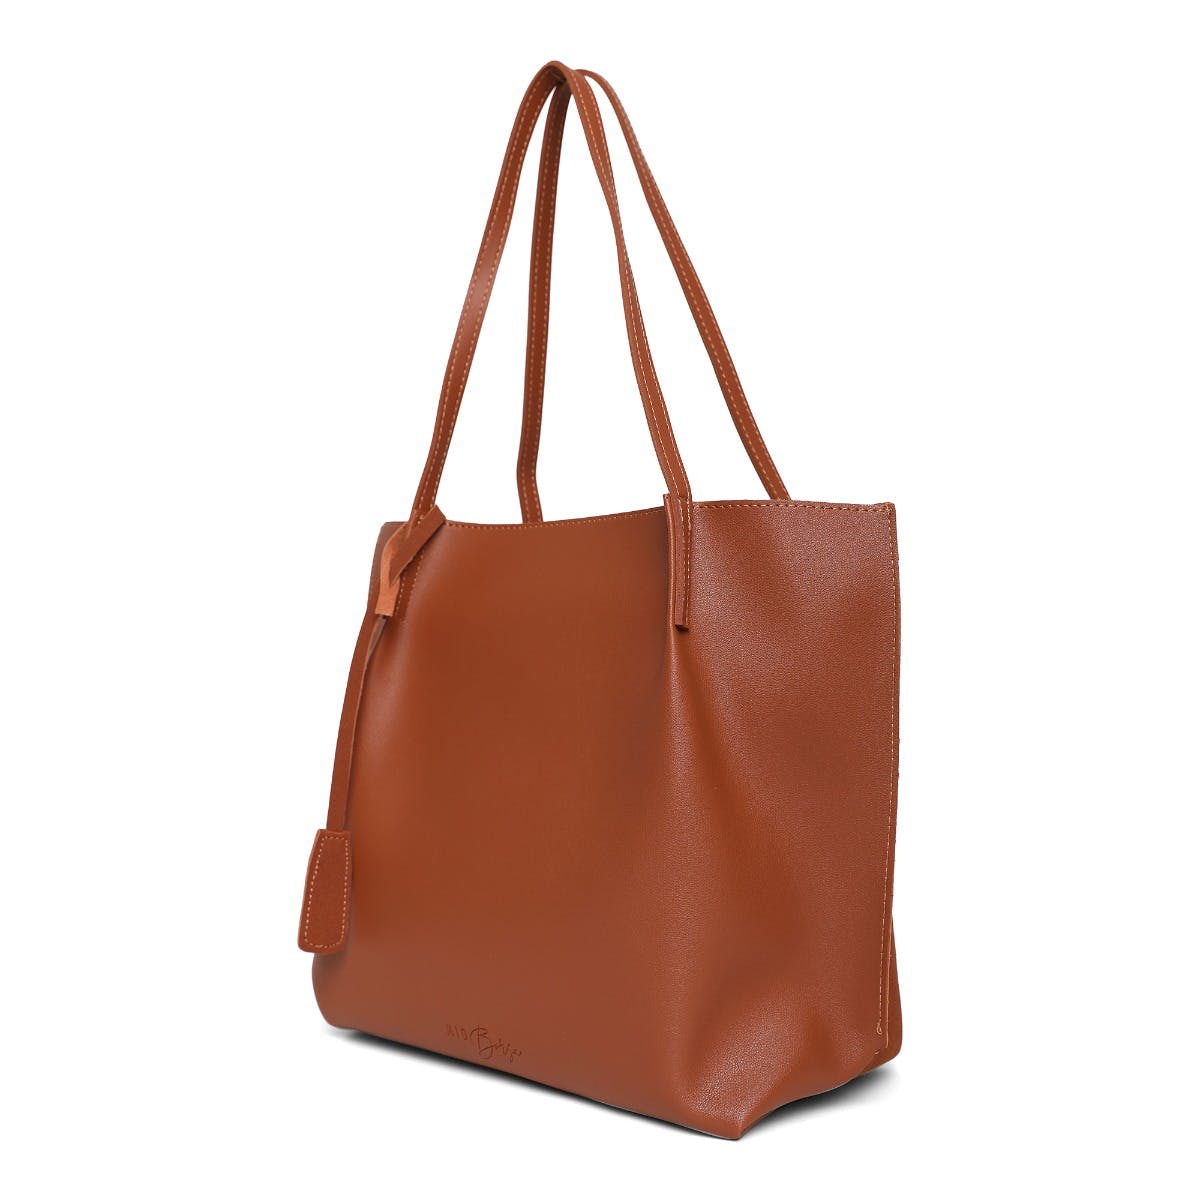 Themoir ruched faux leather tote bag